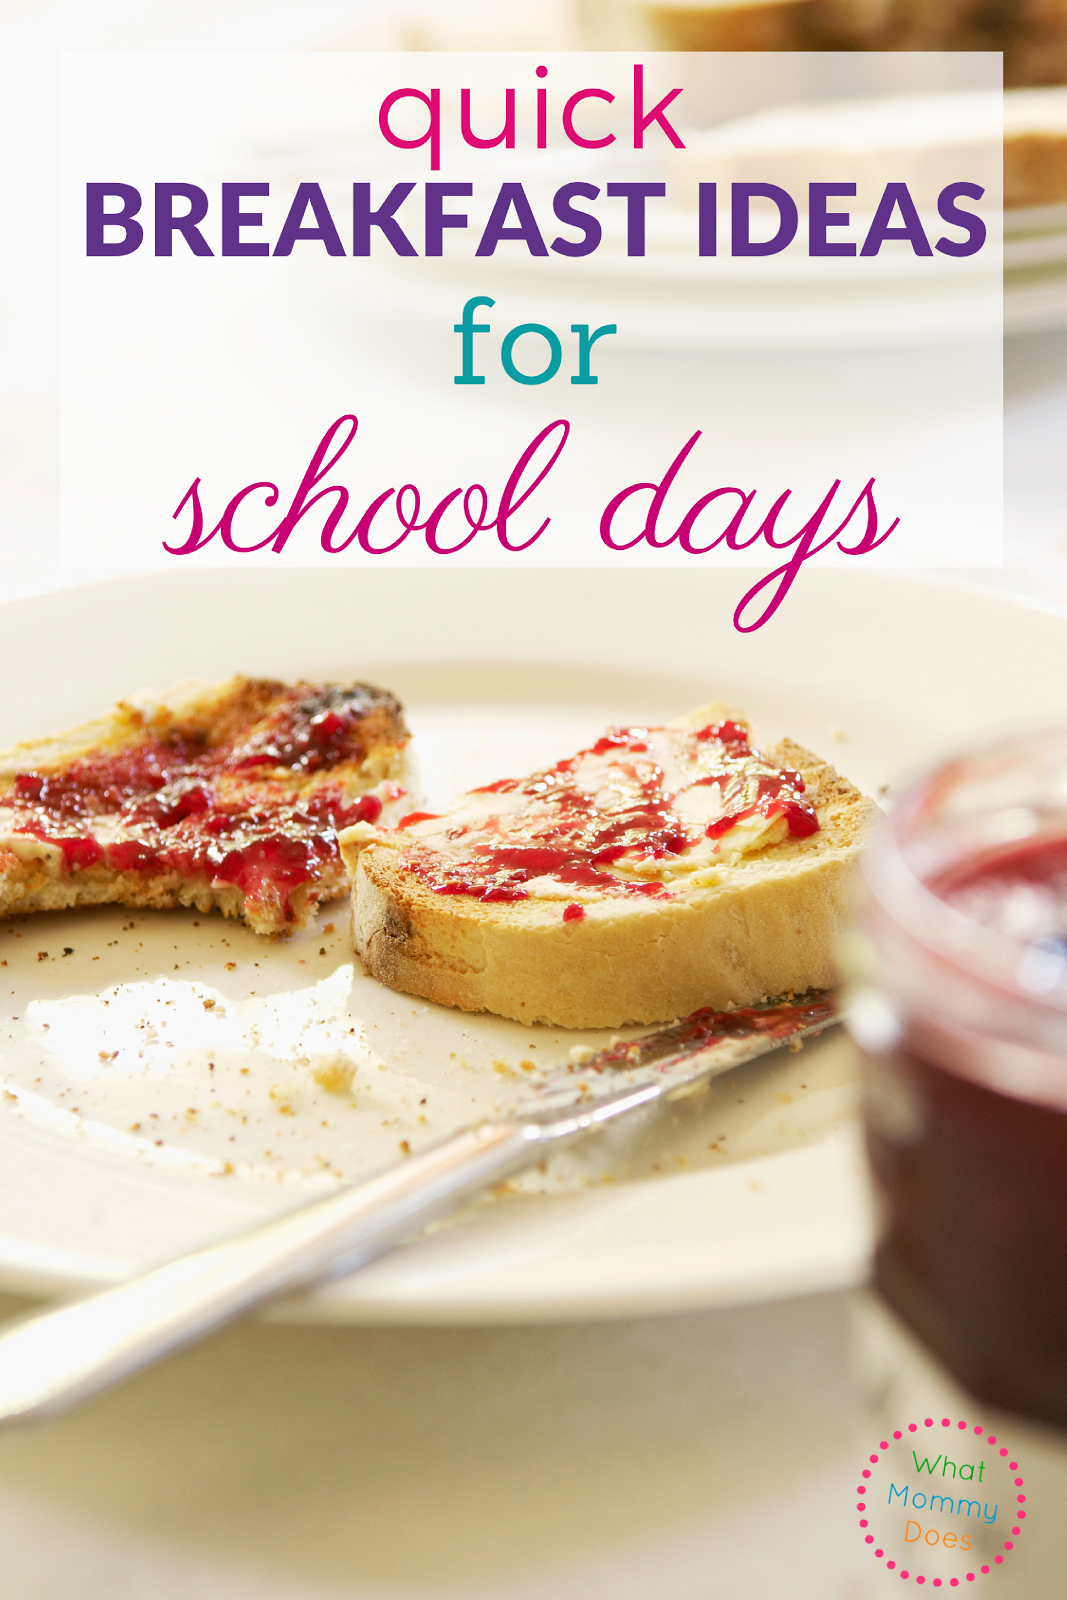 A list of quick school day breakfast ideas that can be made in just a few minutes OR even prepared ahead of time the evening before! Having a go-to list of easy breakfast ideas for your kids is a sanity saver on school mornings. #morning routine #backtoschool #parenting